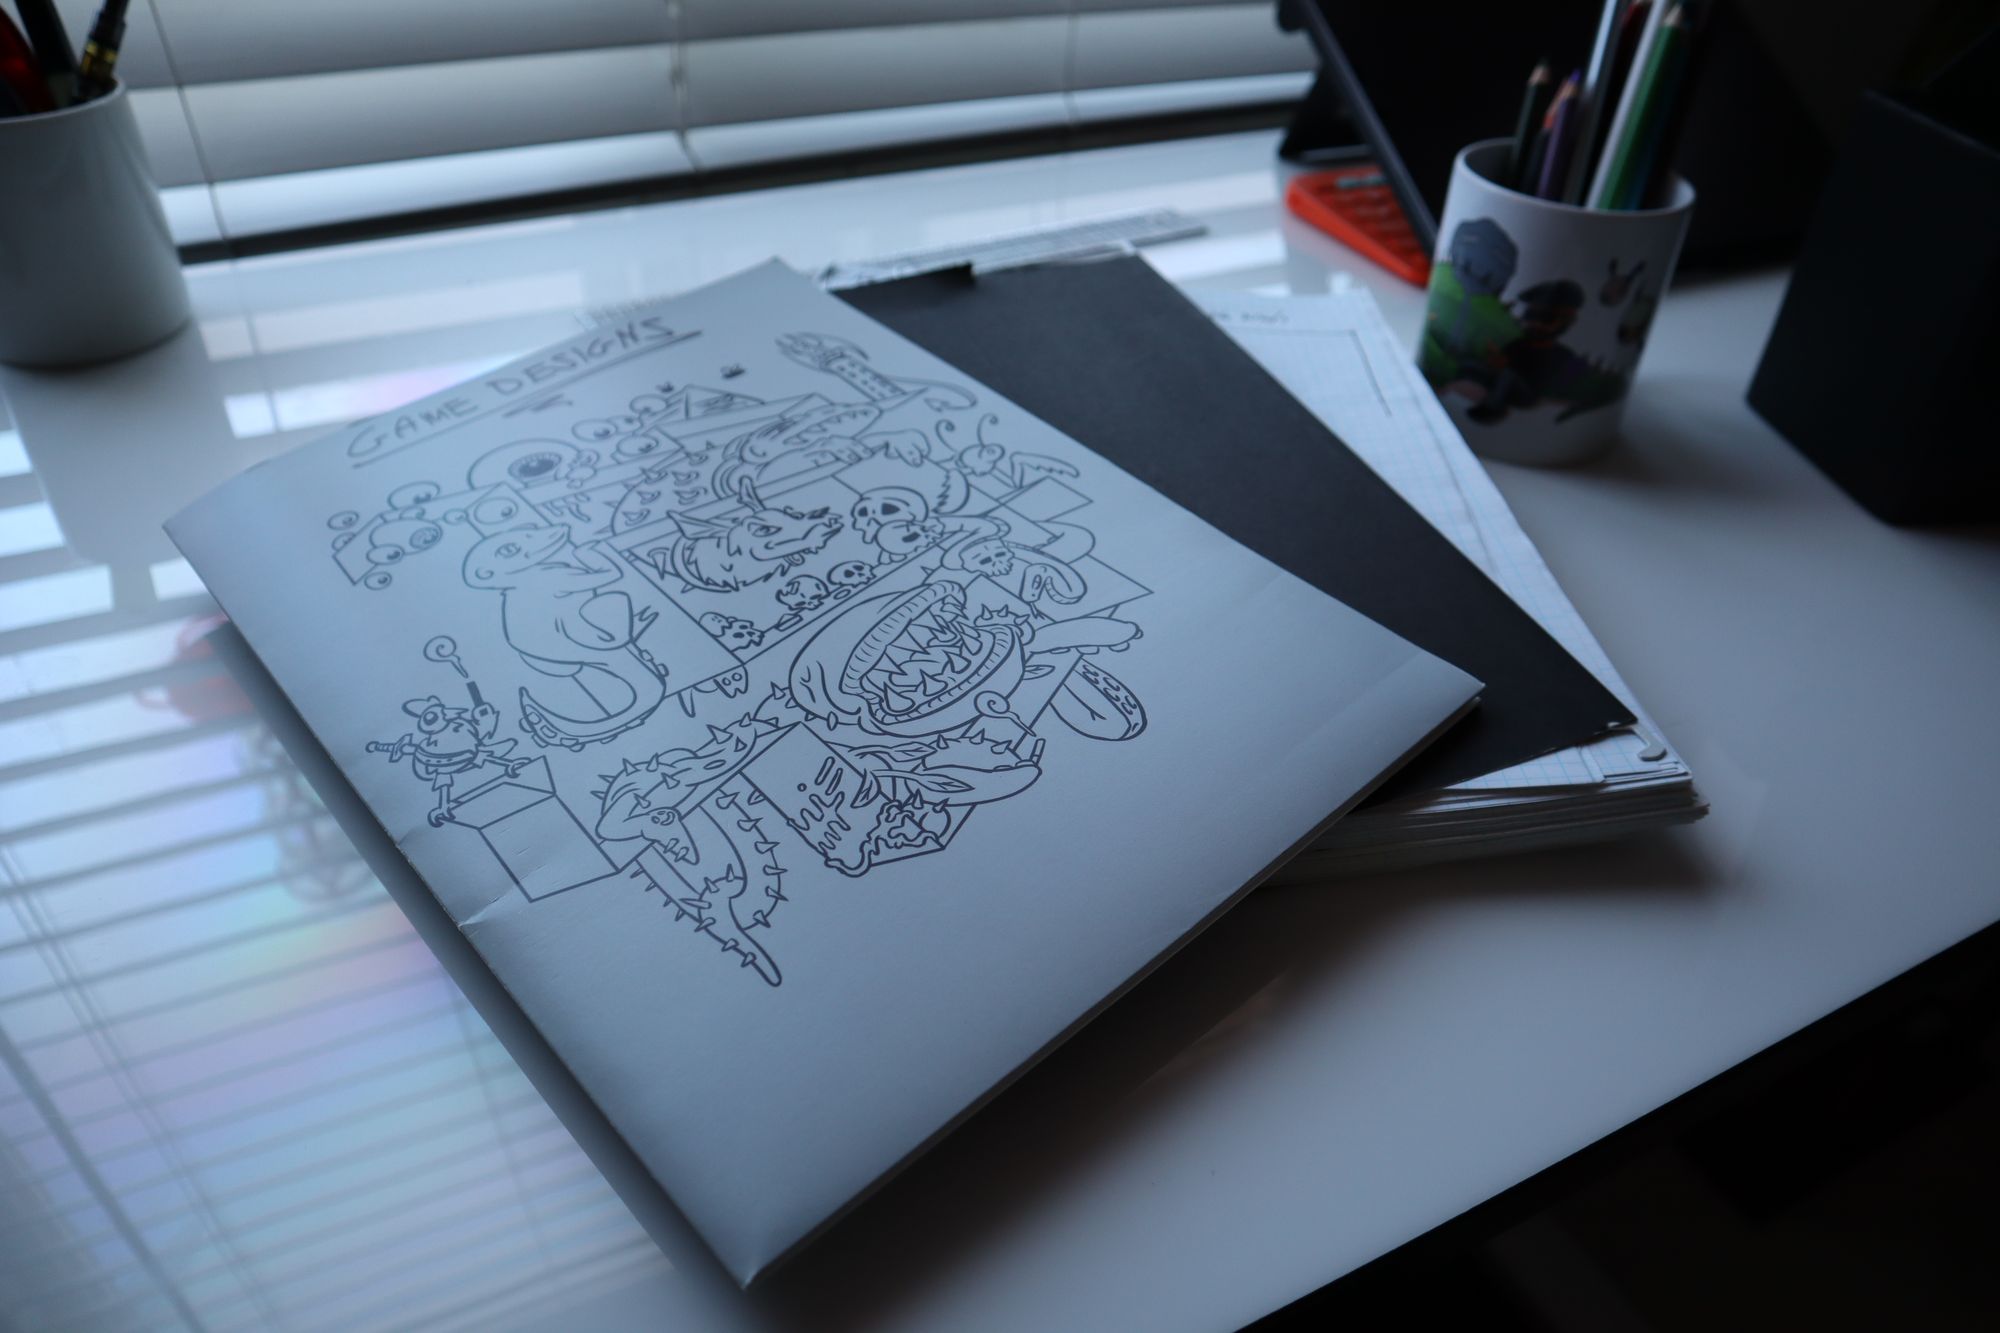 A photo of a desk with some clutter like mugs with pencils and an iPad in the corner. In the center is a stack of graph paper, and a folder with some doodles on the cover, labeled "GAME DESIGNS".